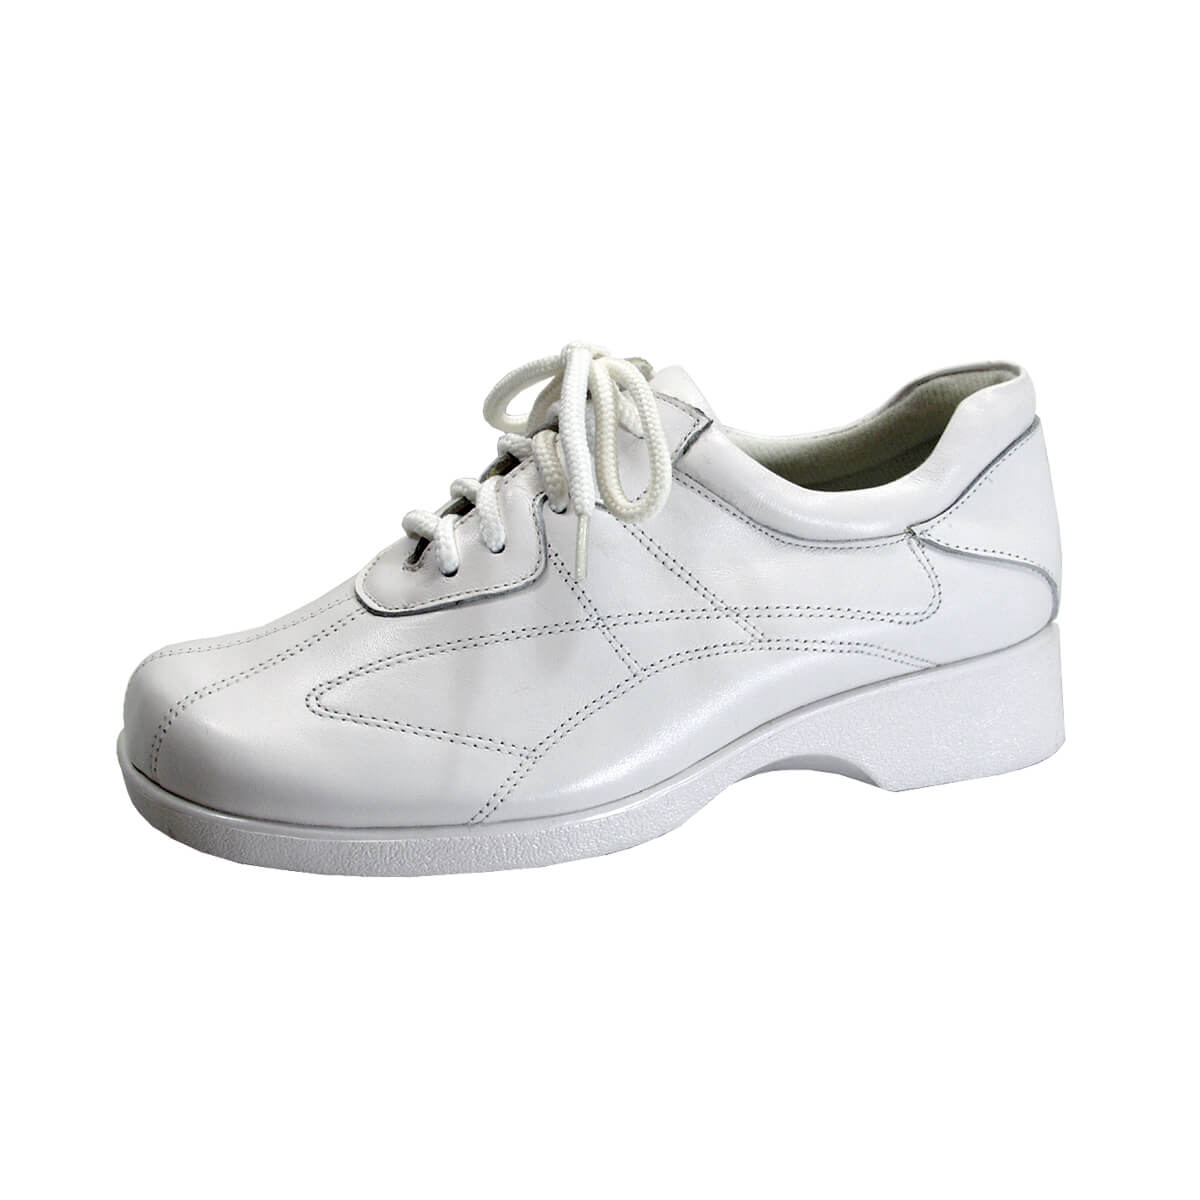 24 HOUR COMFORT Louis Wide Width Comfort Shoes For Work and Casual